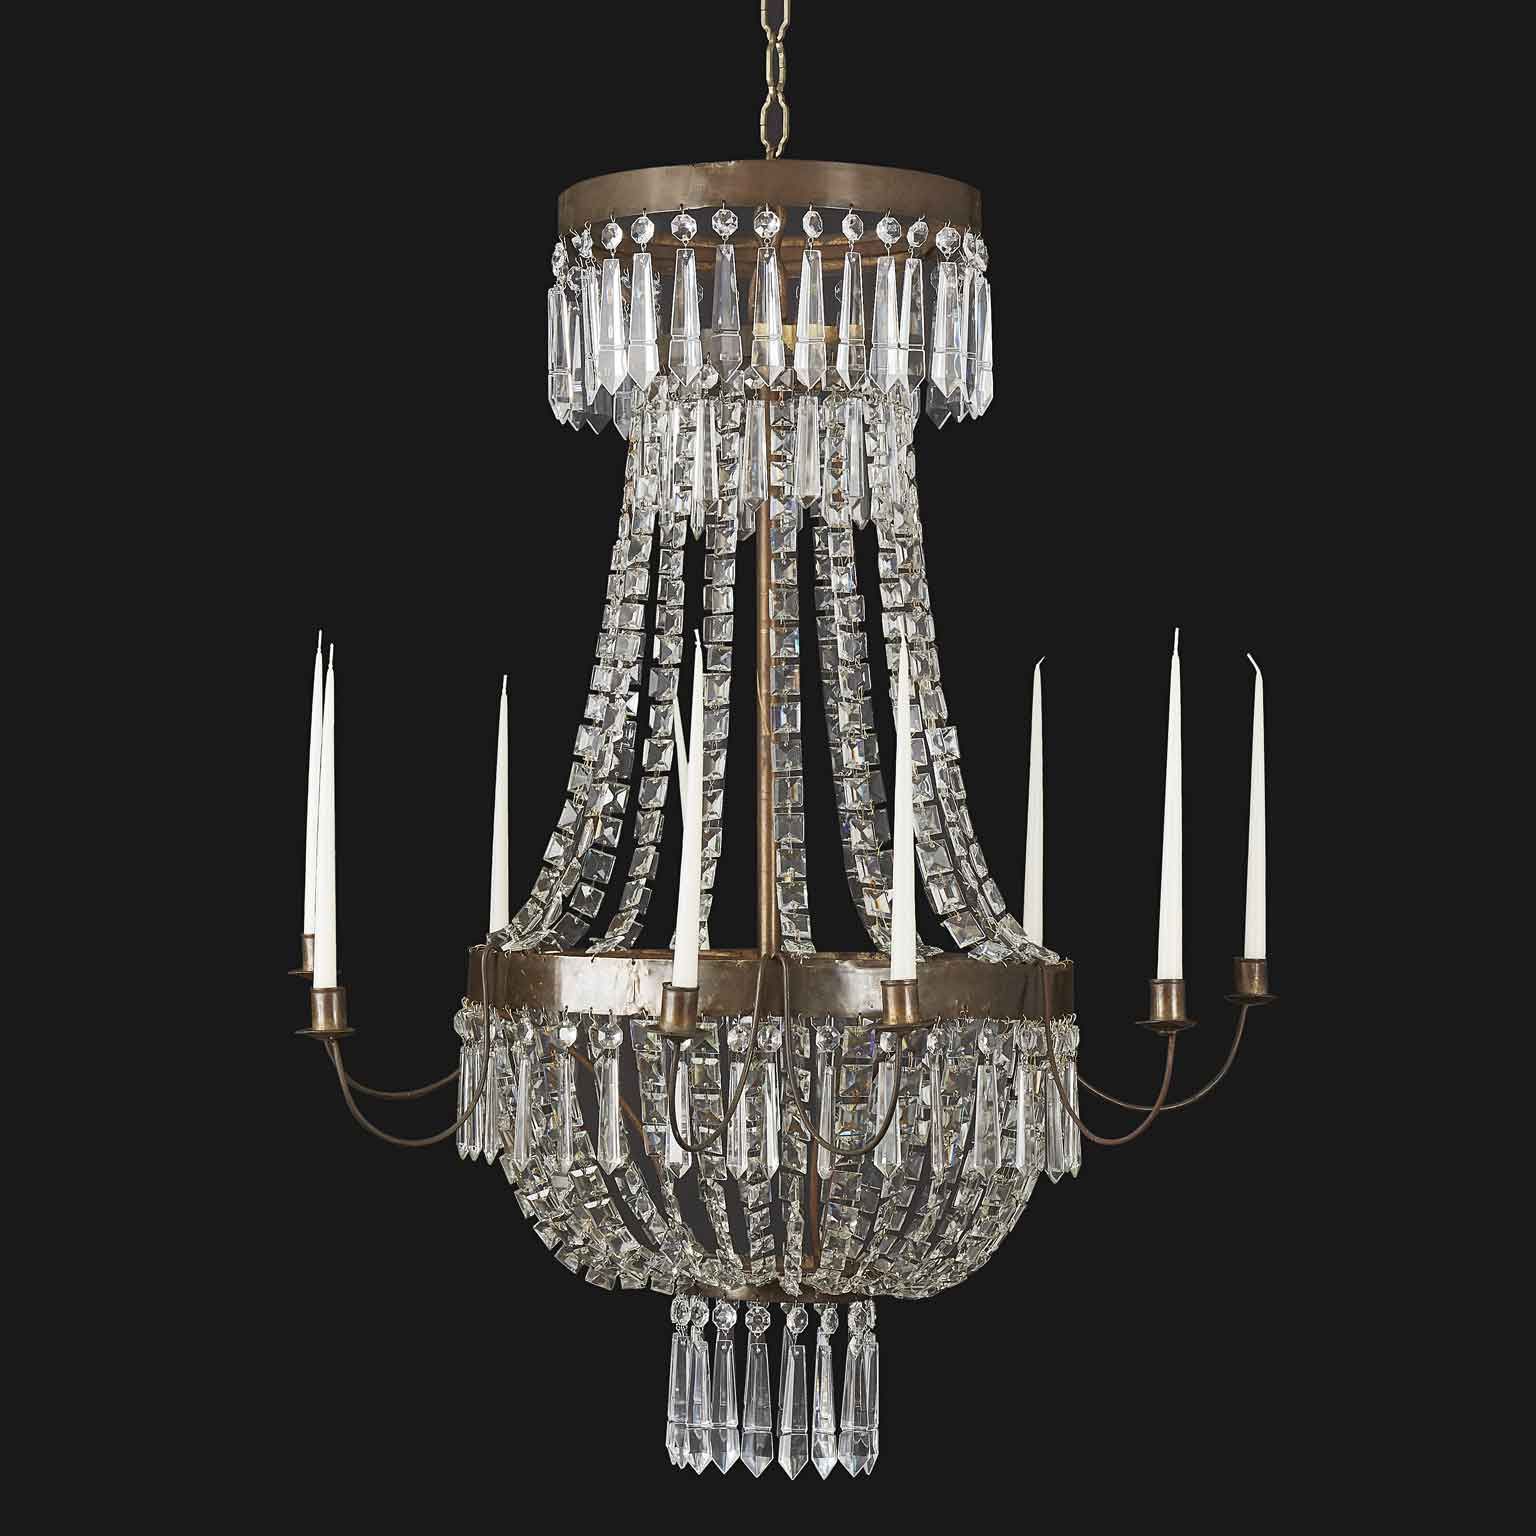 19th Century Italian Empire Crystal Chandelier Nine Armed Candle Chandelier In Favorite Italian Crystal Chandeliers (View 4 of 15)